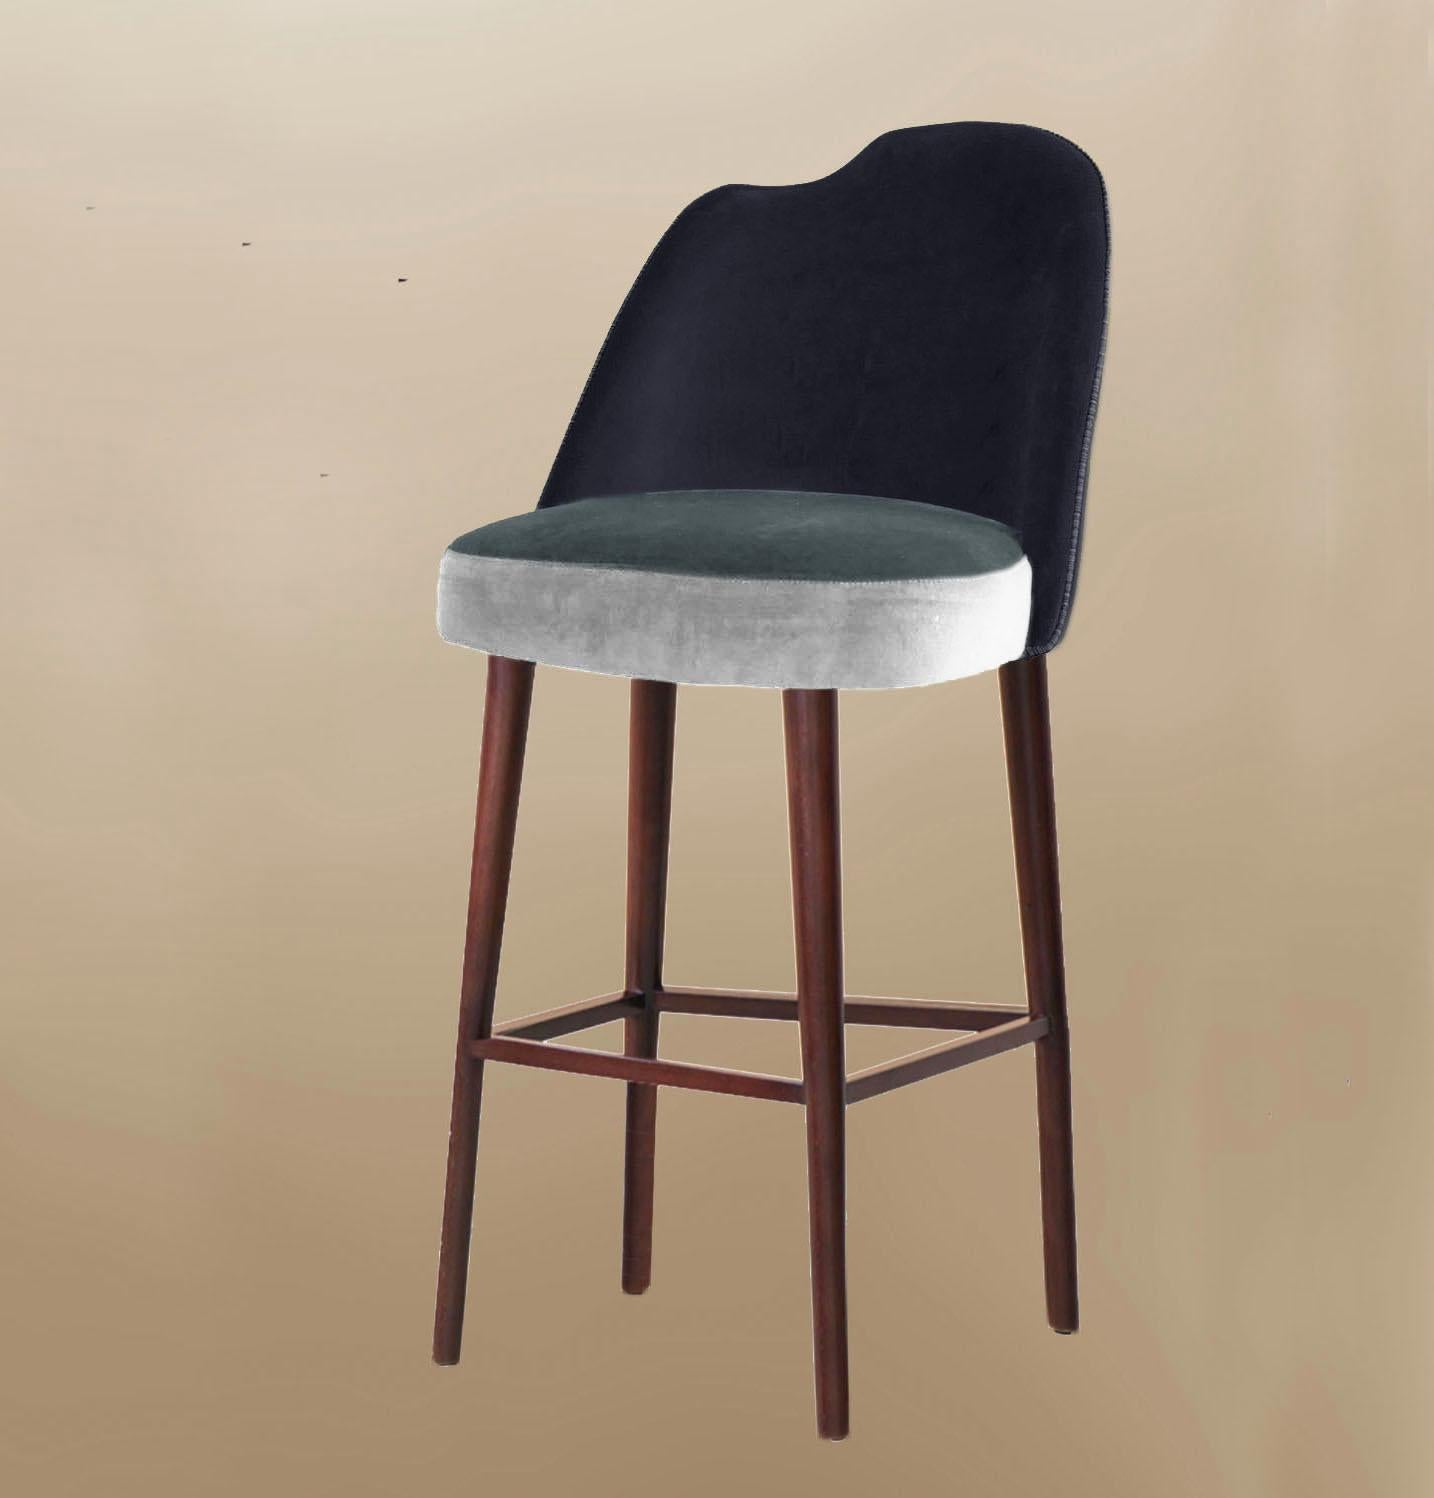 The Yves chair is a piece created by the prestigious Spanish designer Sergio Prieto for Dovain Studio. Its shapes and materials allow it to adapt to any environment, from a classic space to something contemporary and fresh. Yves is the name of the